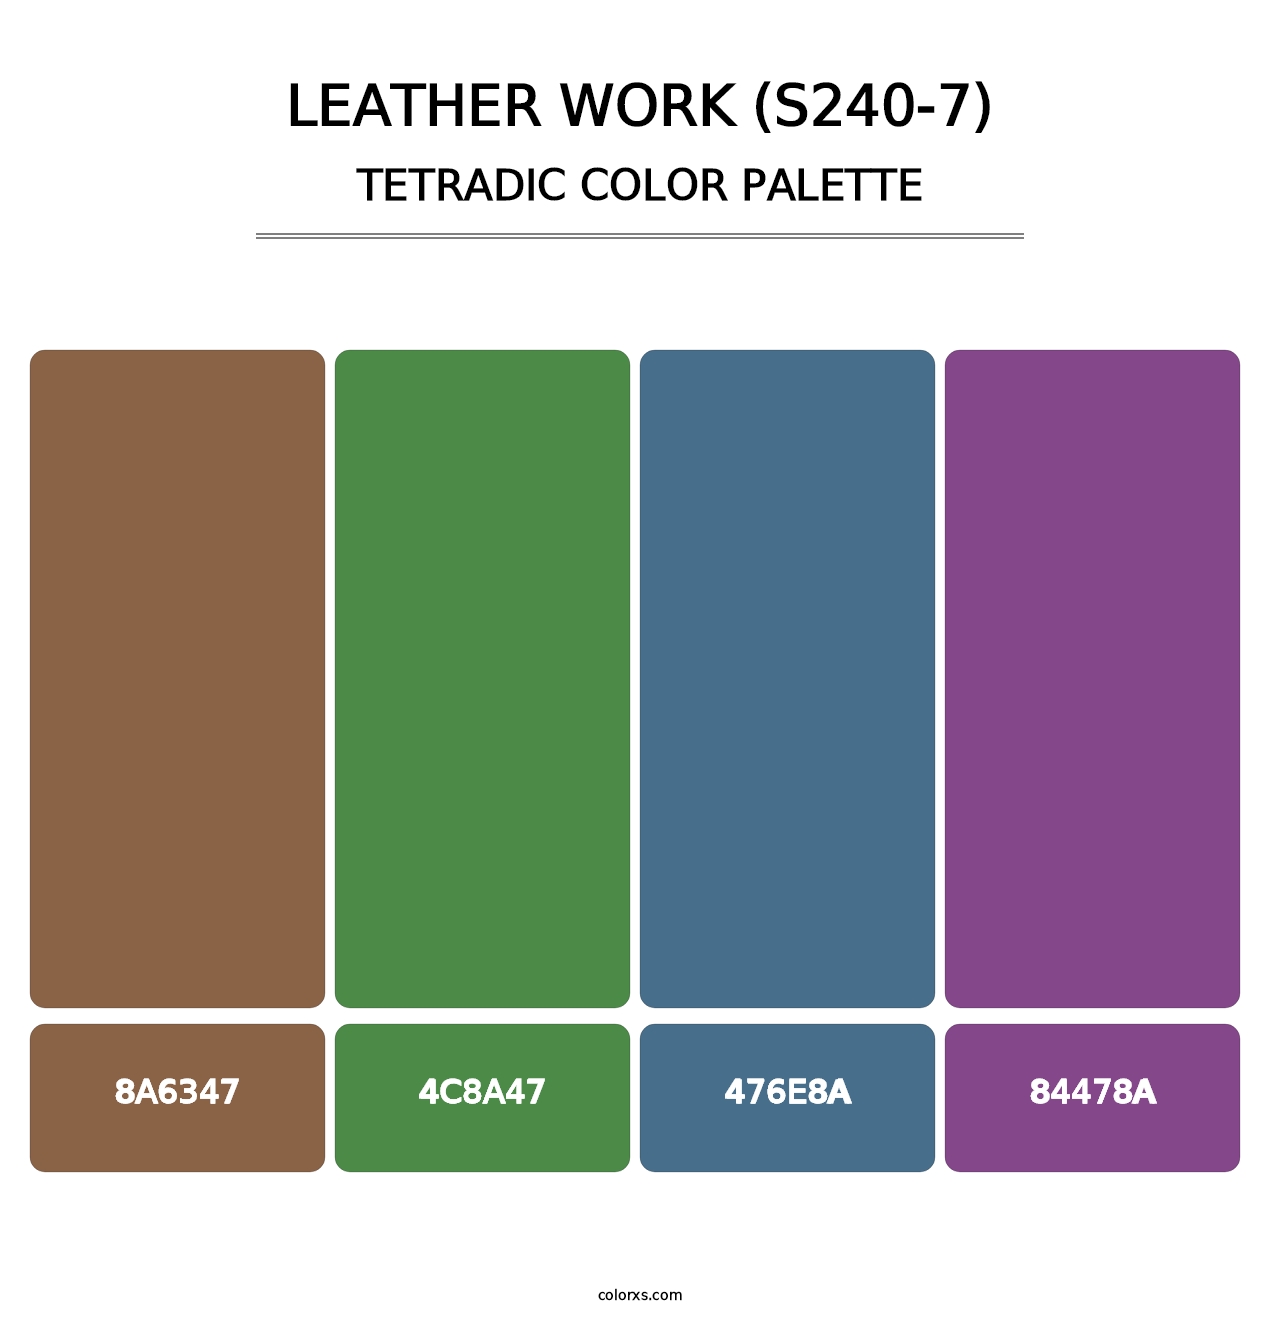 Leather Work (S240-7) - Tetradic Color Palette